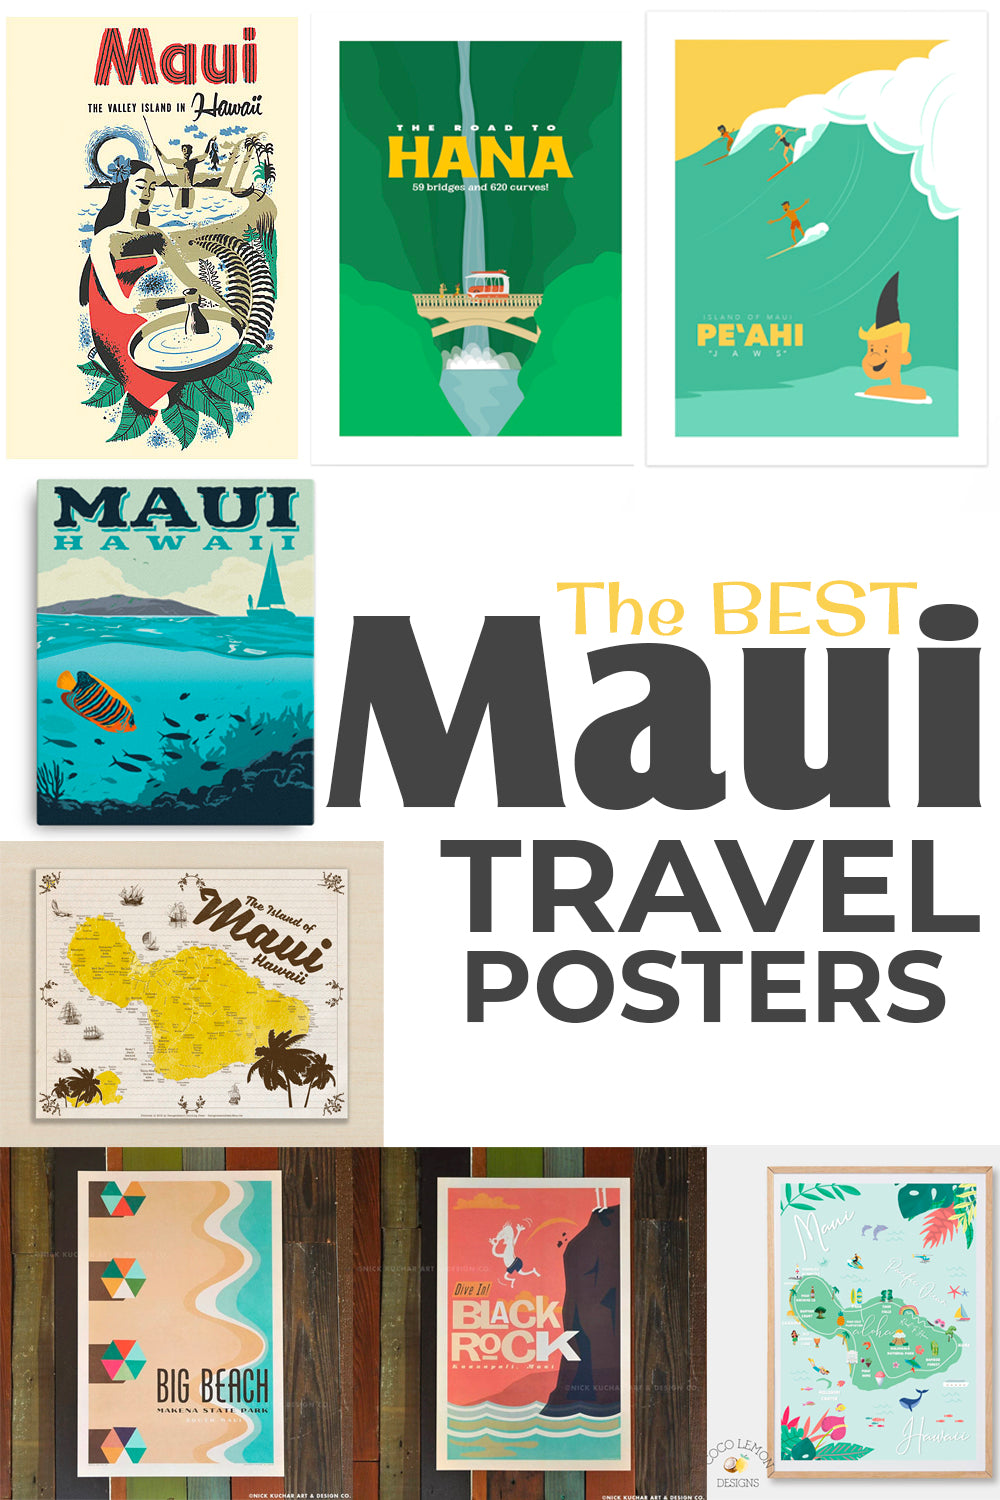 The Best Maui Travel Posters